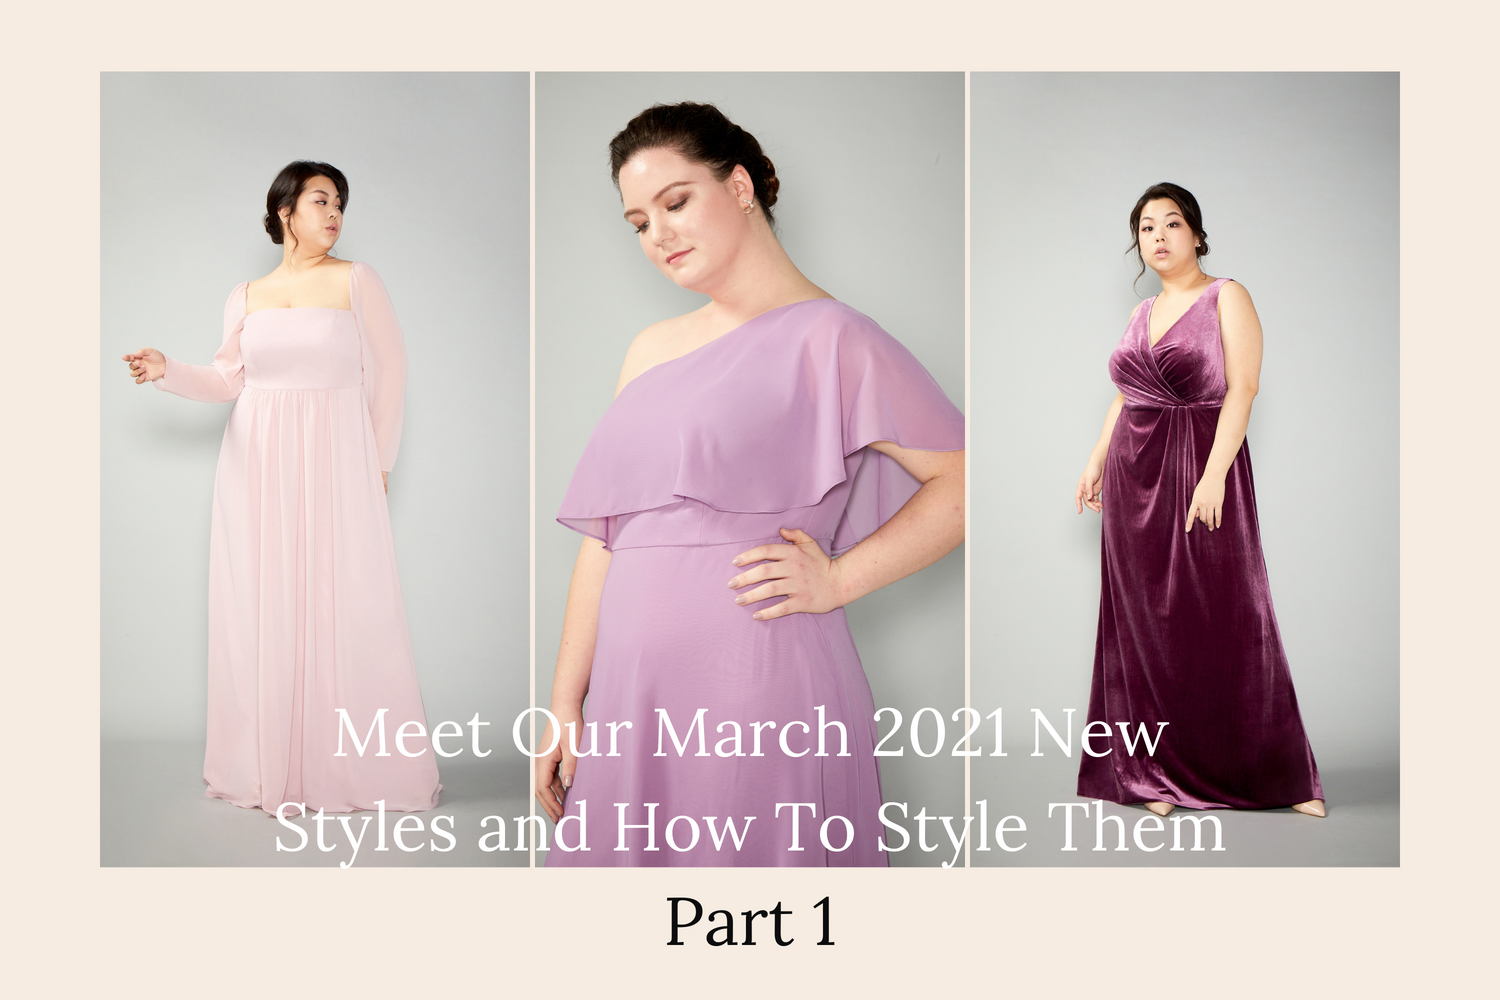 Meet Our March 2021 New Styles and How To Style Them - Part 1